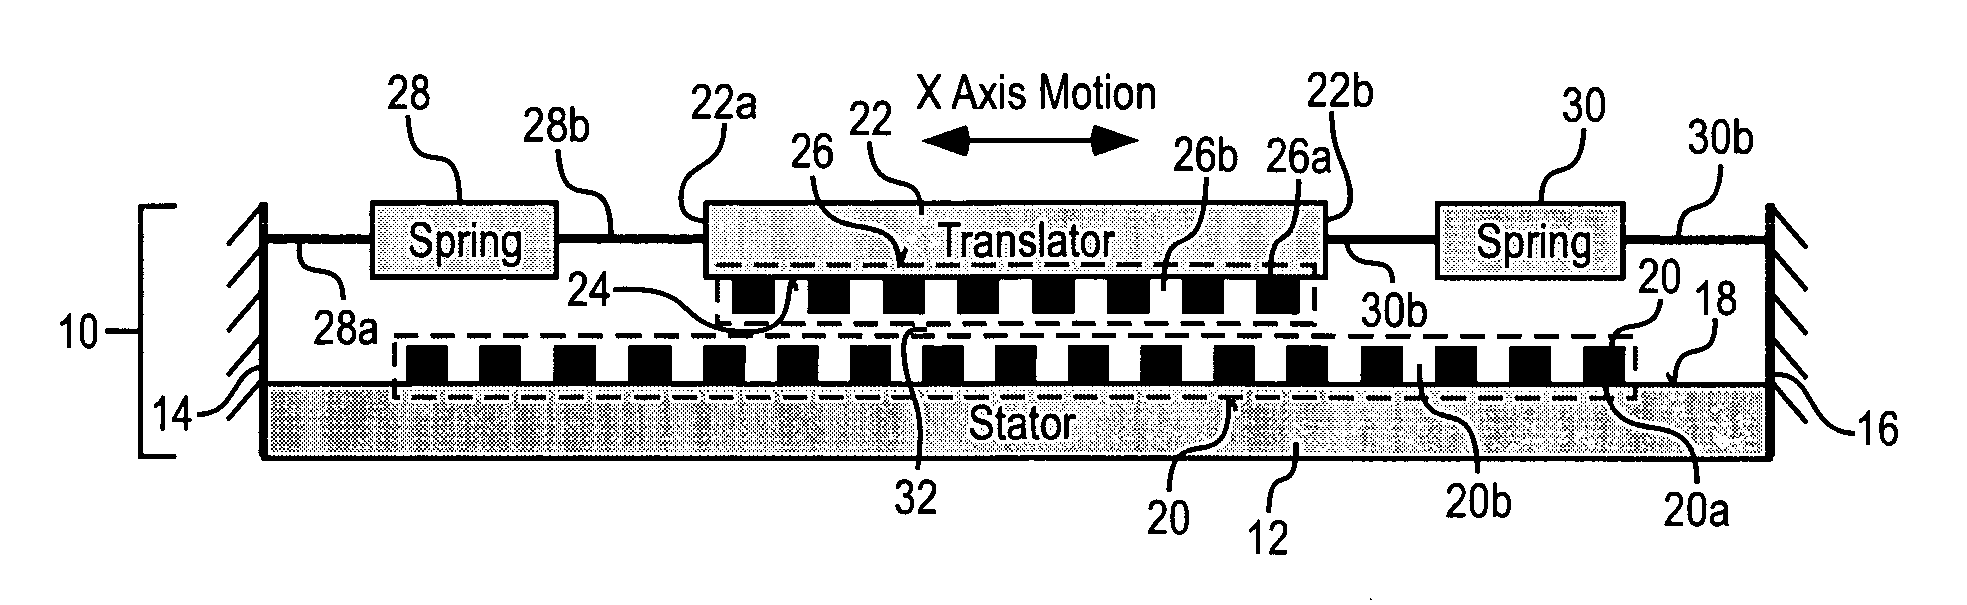 System for controlling an electrostatic stepper motor